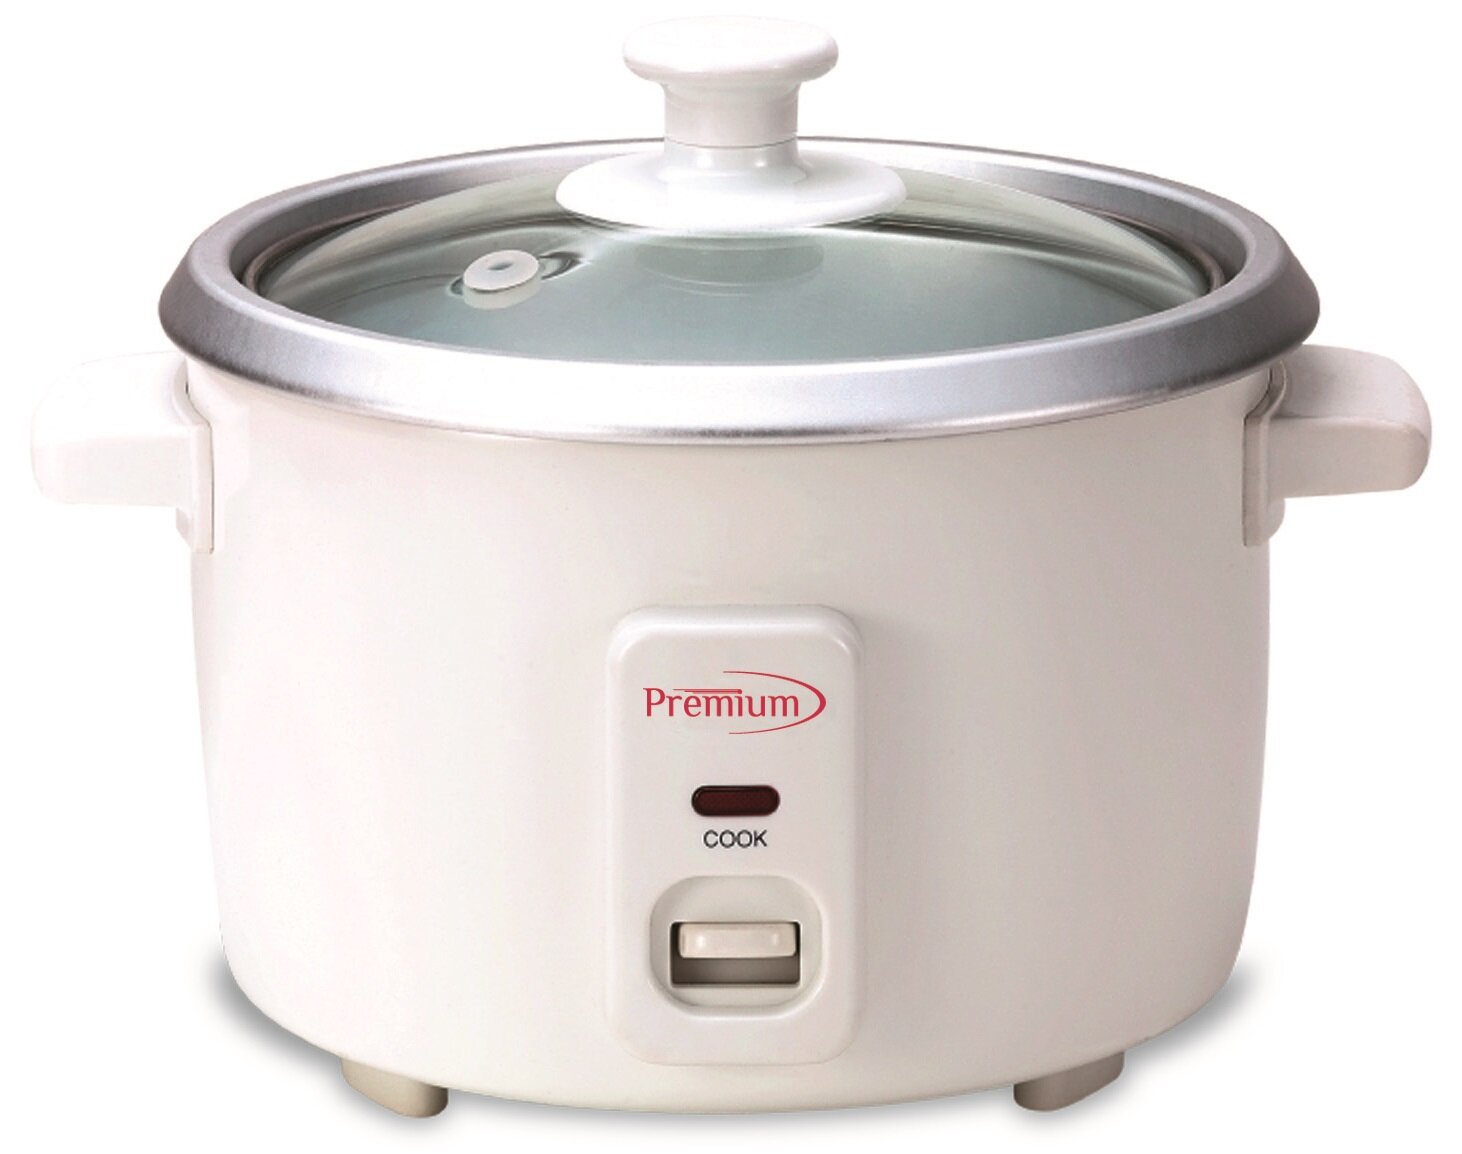 Part of a National rice cooker